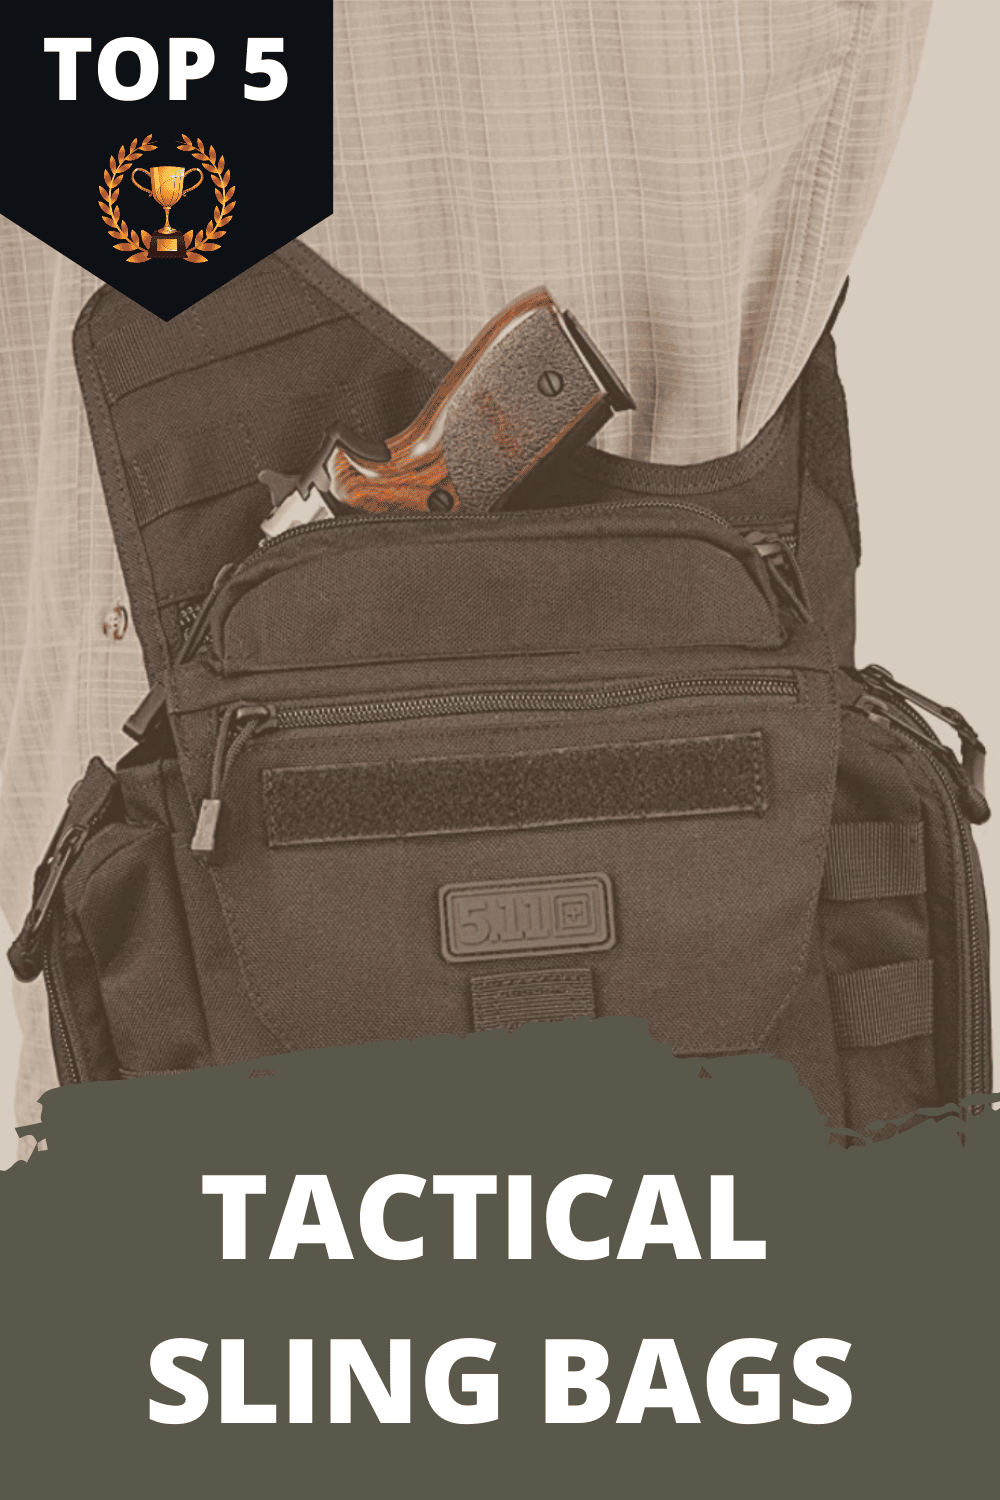 5 Best Tactical Sling Bag & Backpack Options (Buying Guide)